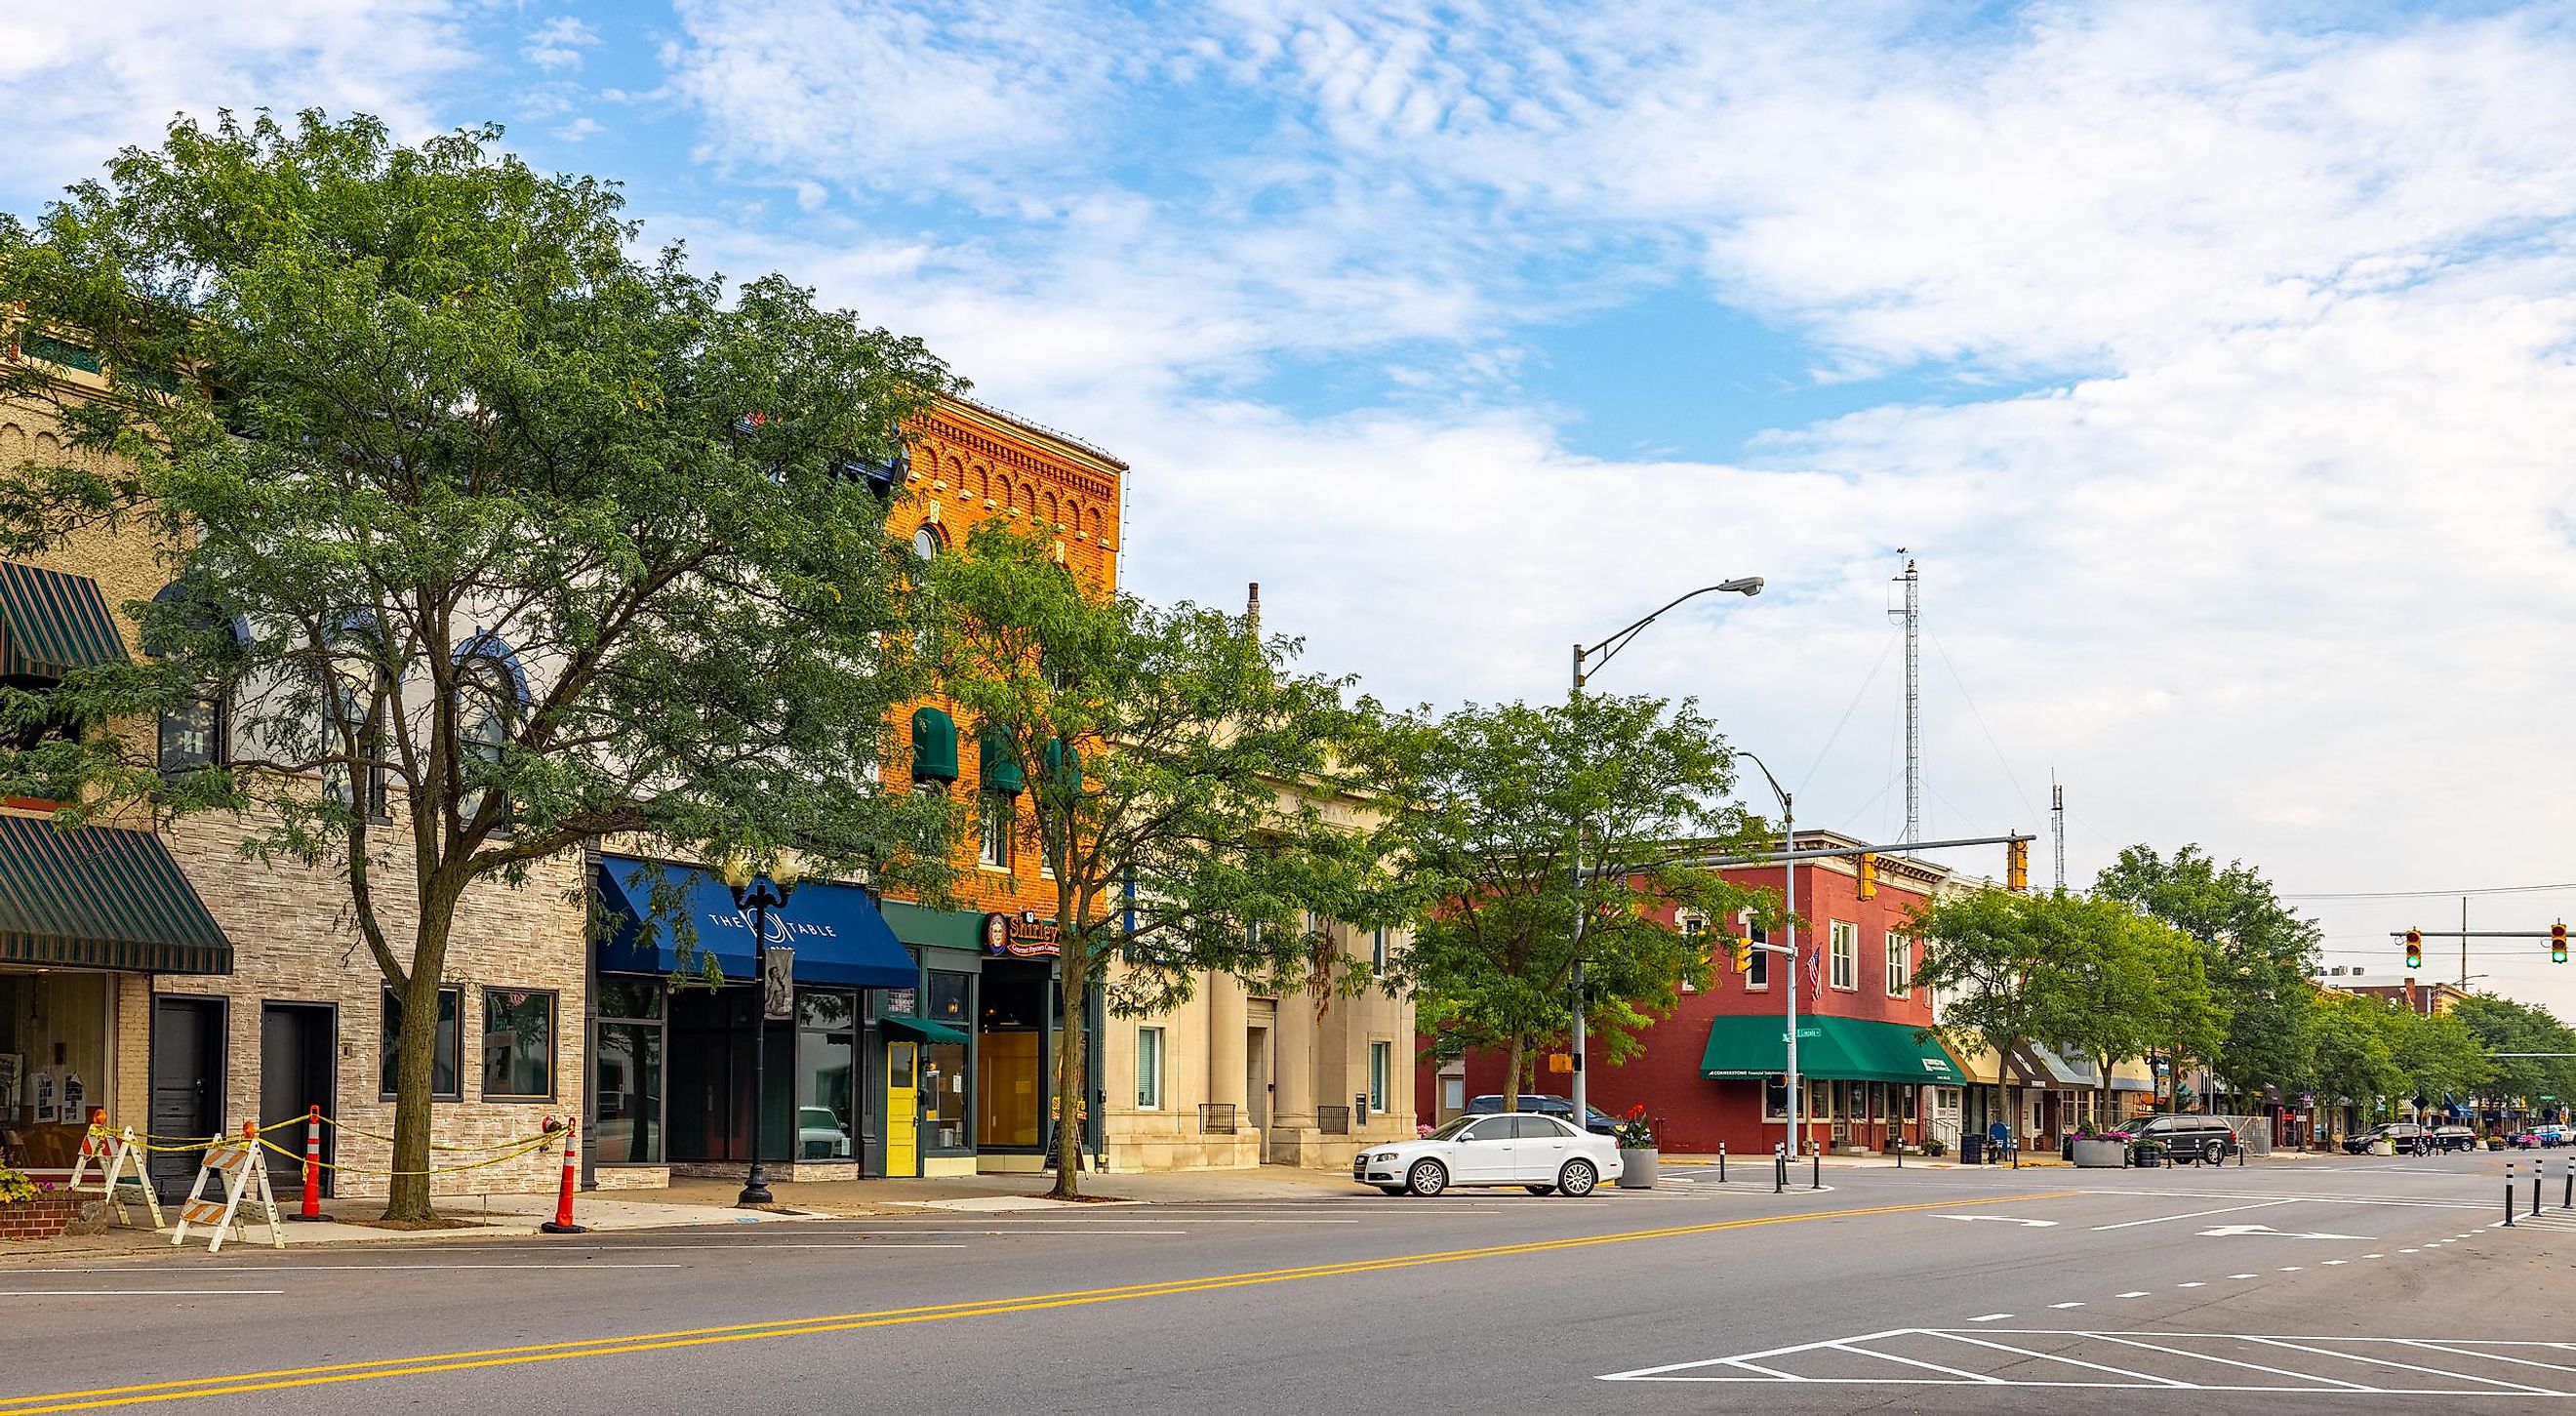 Goshen, Indiana: The business district on Main Street